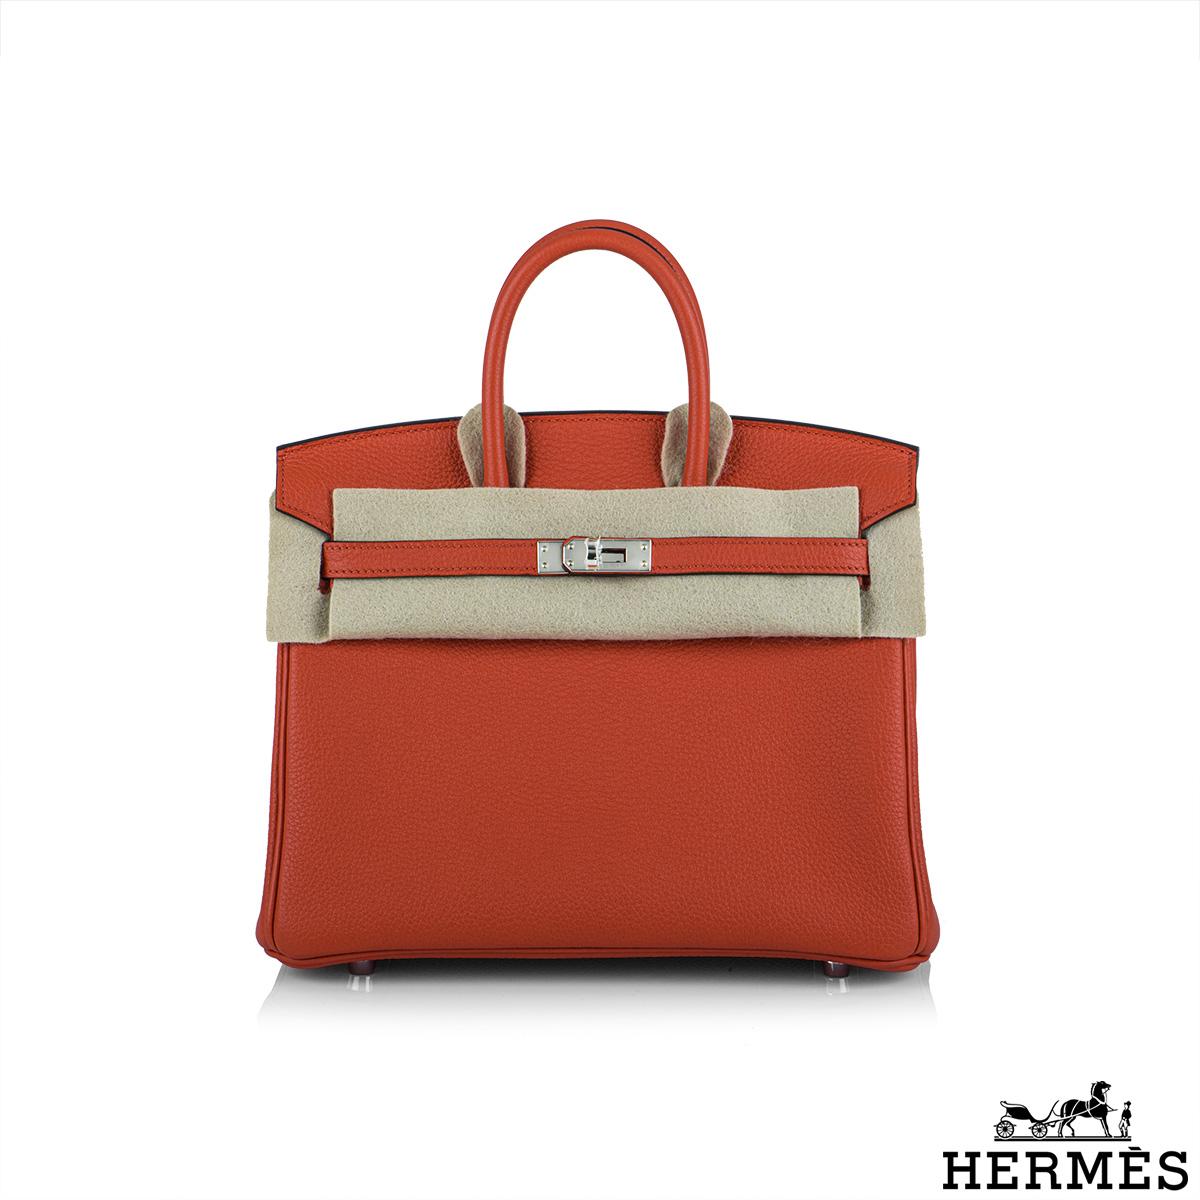 An exquisite Hermès 25cm Capucine bag. The exterior of this birkin is in vibrant capucine togo leather with tonal stitching. It features palladium hardware with two straps and front toggle closure. The interior is lined with capucine chevre and has